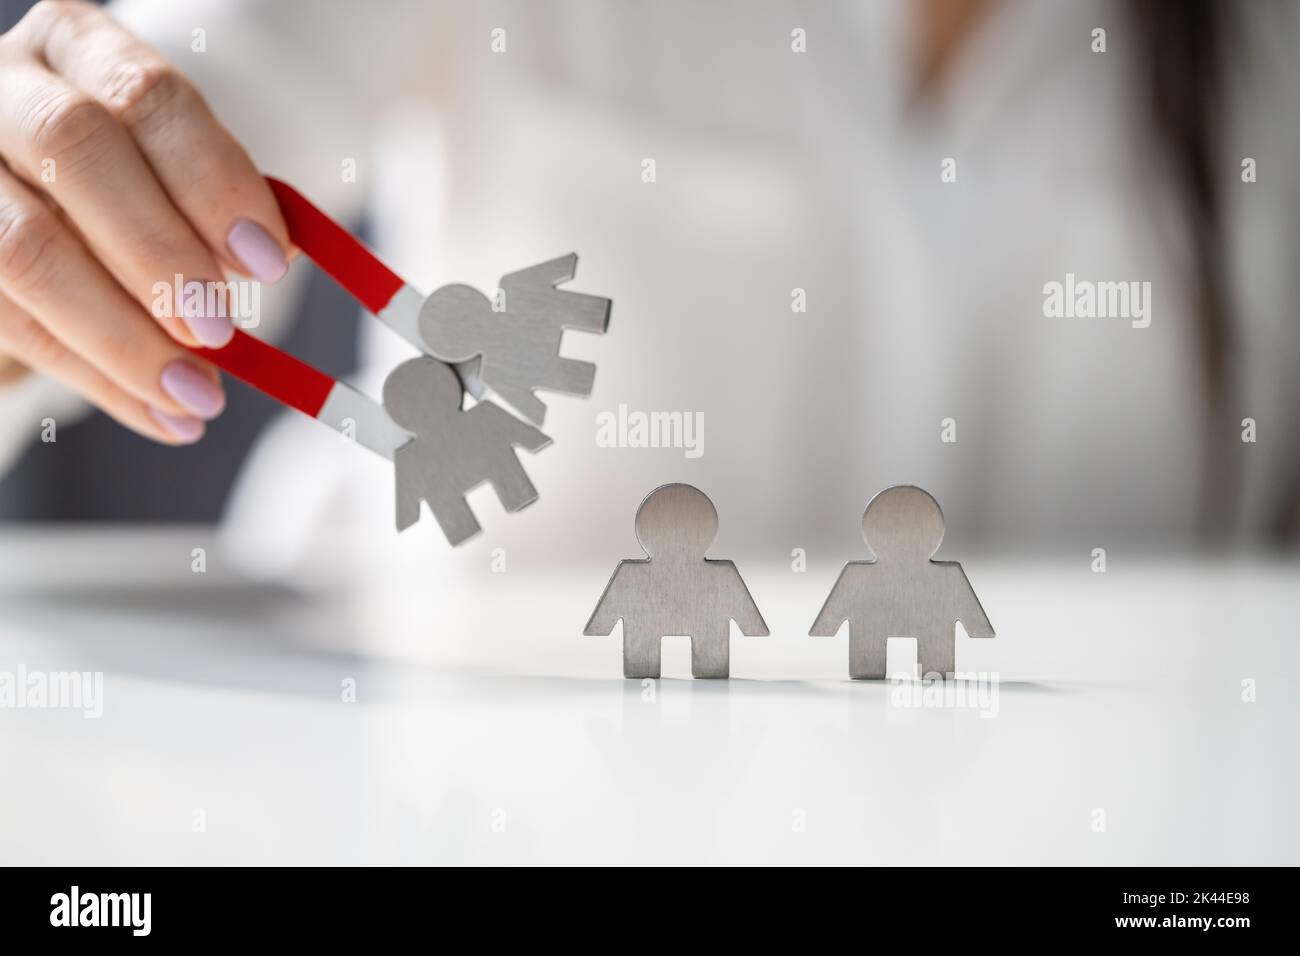 Attract Lead And Customer Using Magnet. Business Management Stock Photo